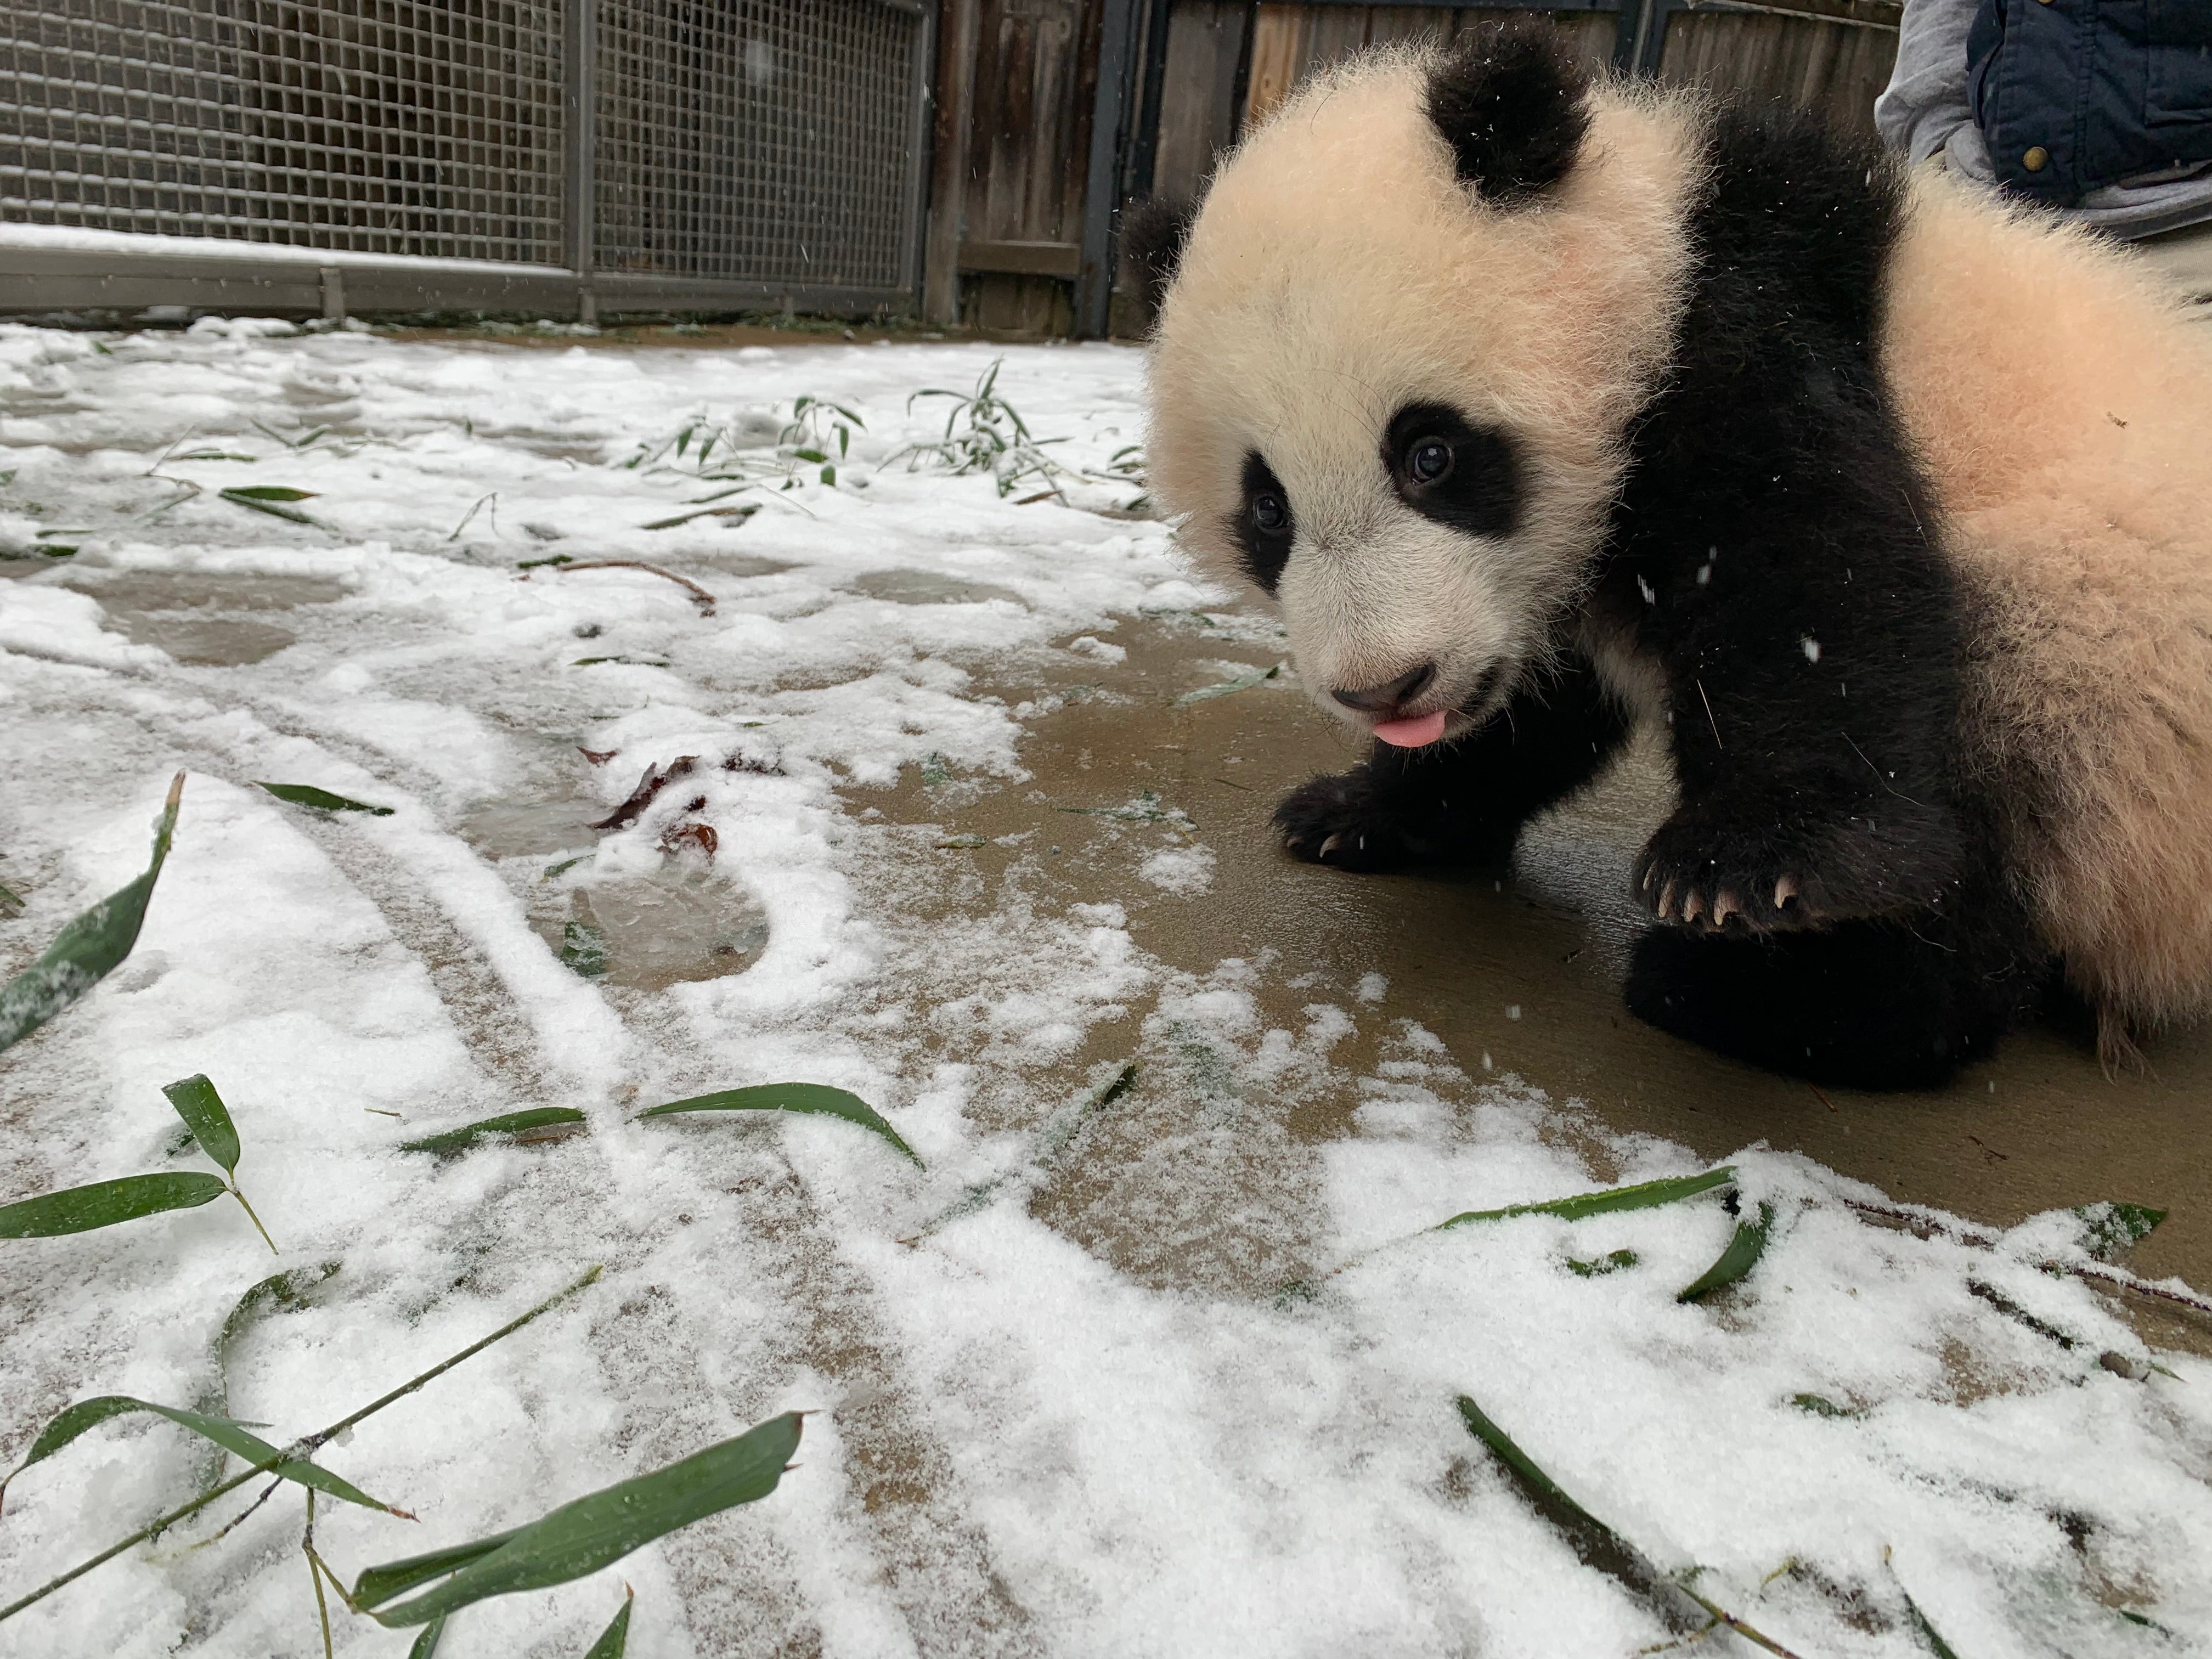 A giant panda cub stands in an area covered in a light dusting of snow and some scattered bamboo leaves.